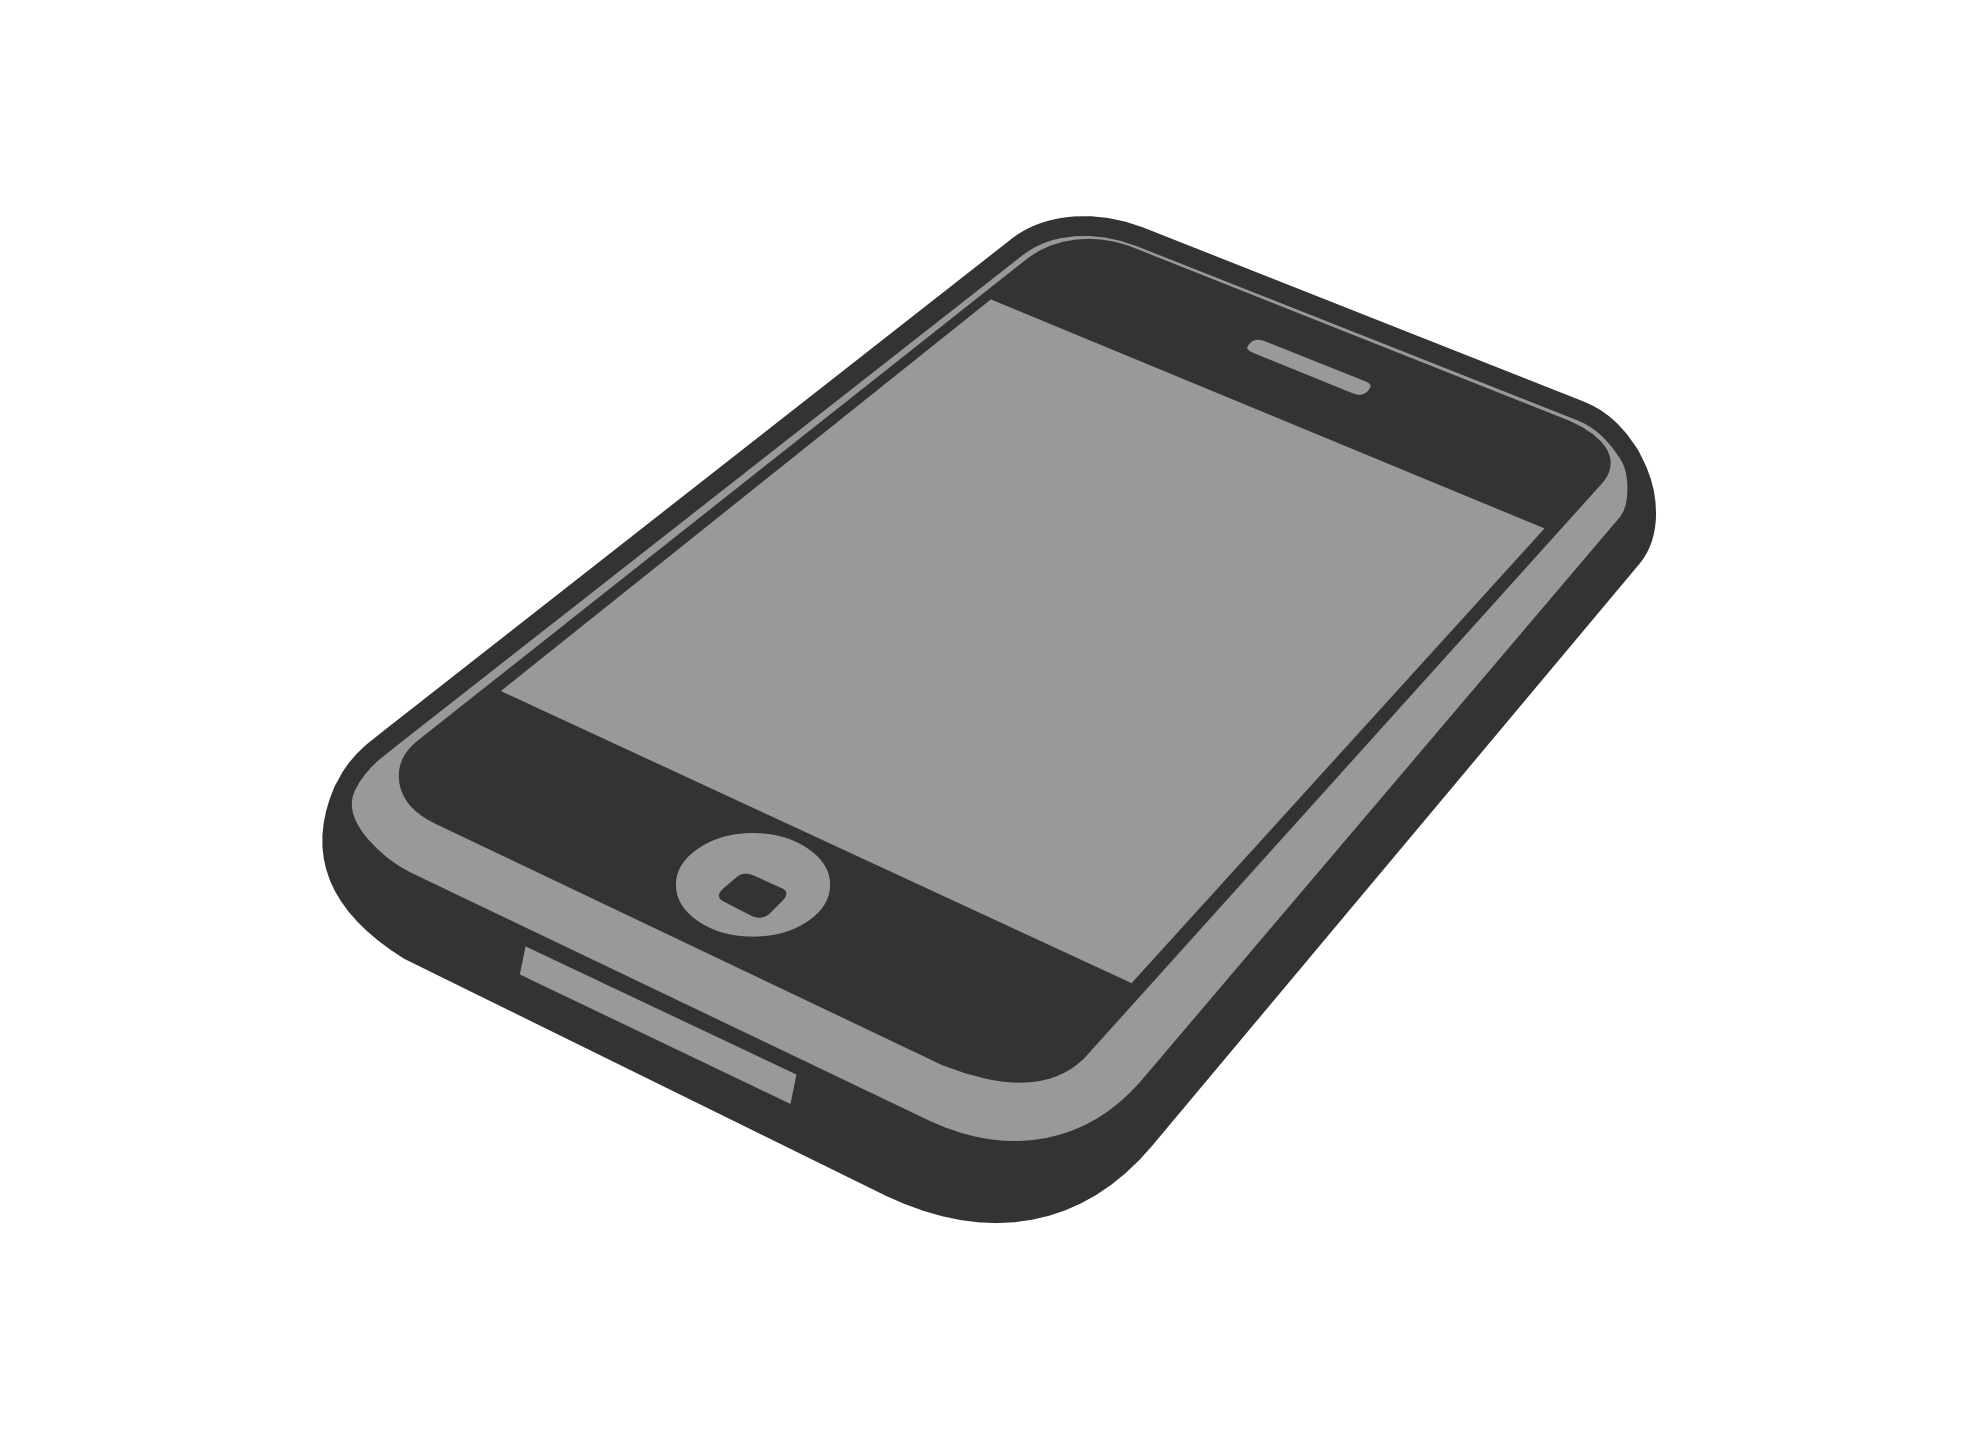 Iphone Phone Icon Png   Clipart Best